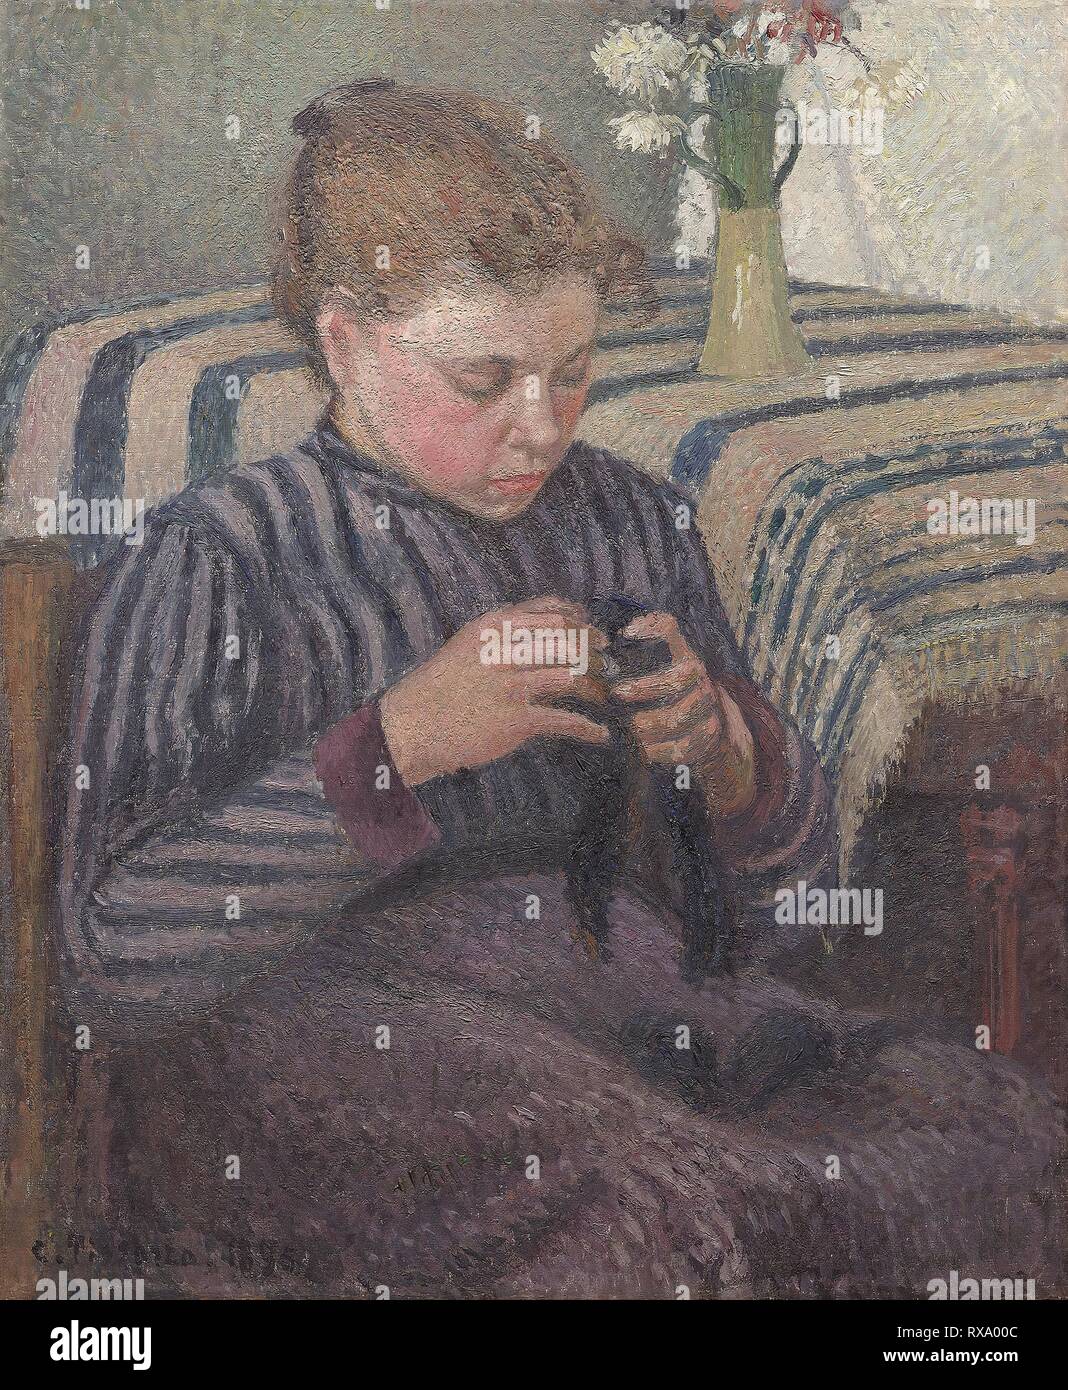 Woman Mending. Camille Pissarro; French, 1830-1903. Date: 1895. Dimensions: 65.4 × 54.4 cm (25 5/8 × 21 3/8 in.). Oil on canvas. Origin: France. Museum: The Chicago Art Institute. Stock Photo